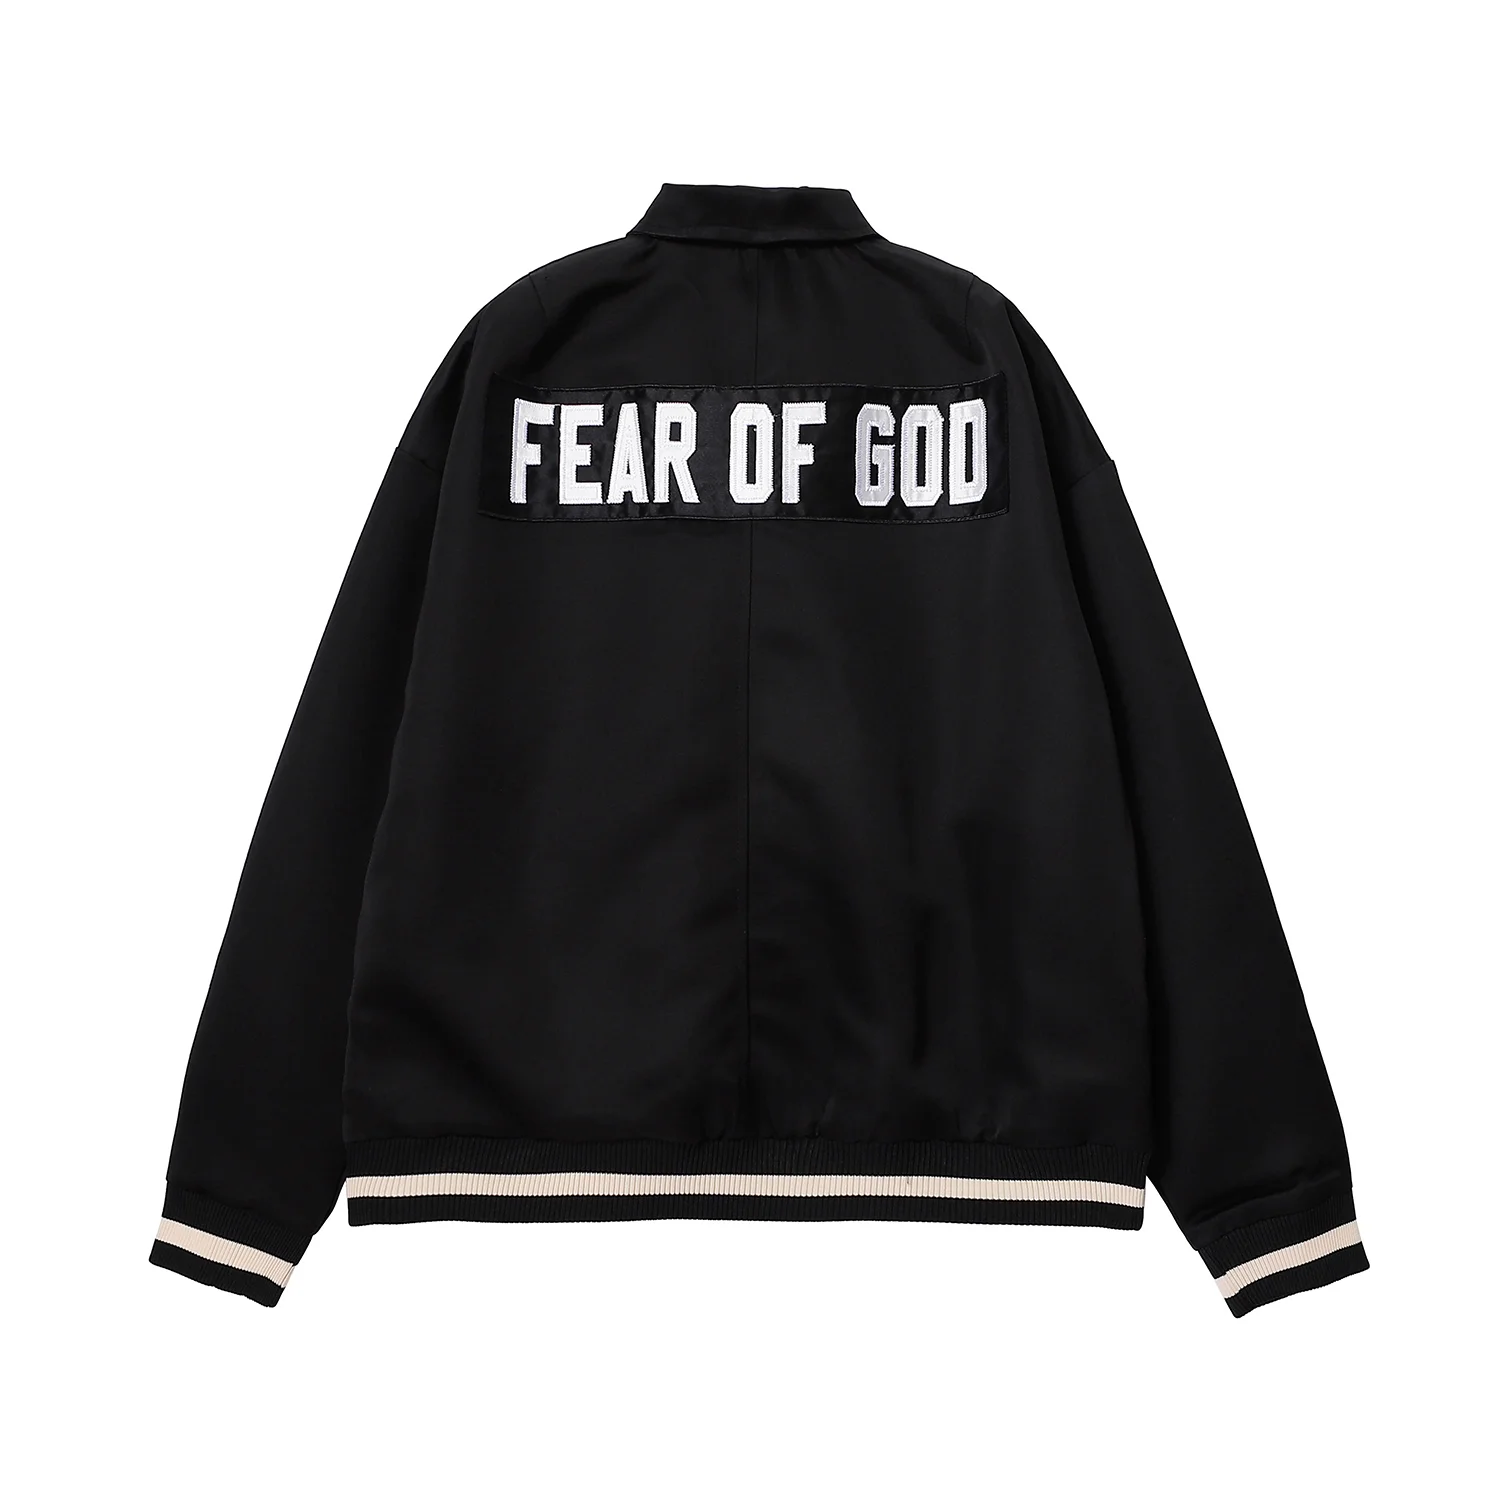 

Fear of god essentials wholesale oversize streetwear print logo men's hoodie jackets, Could be customized